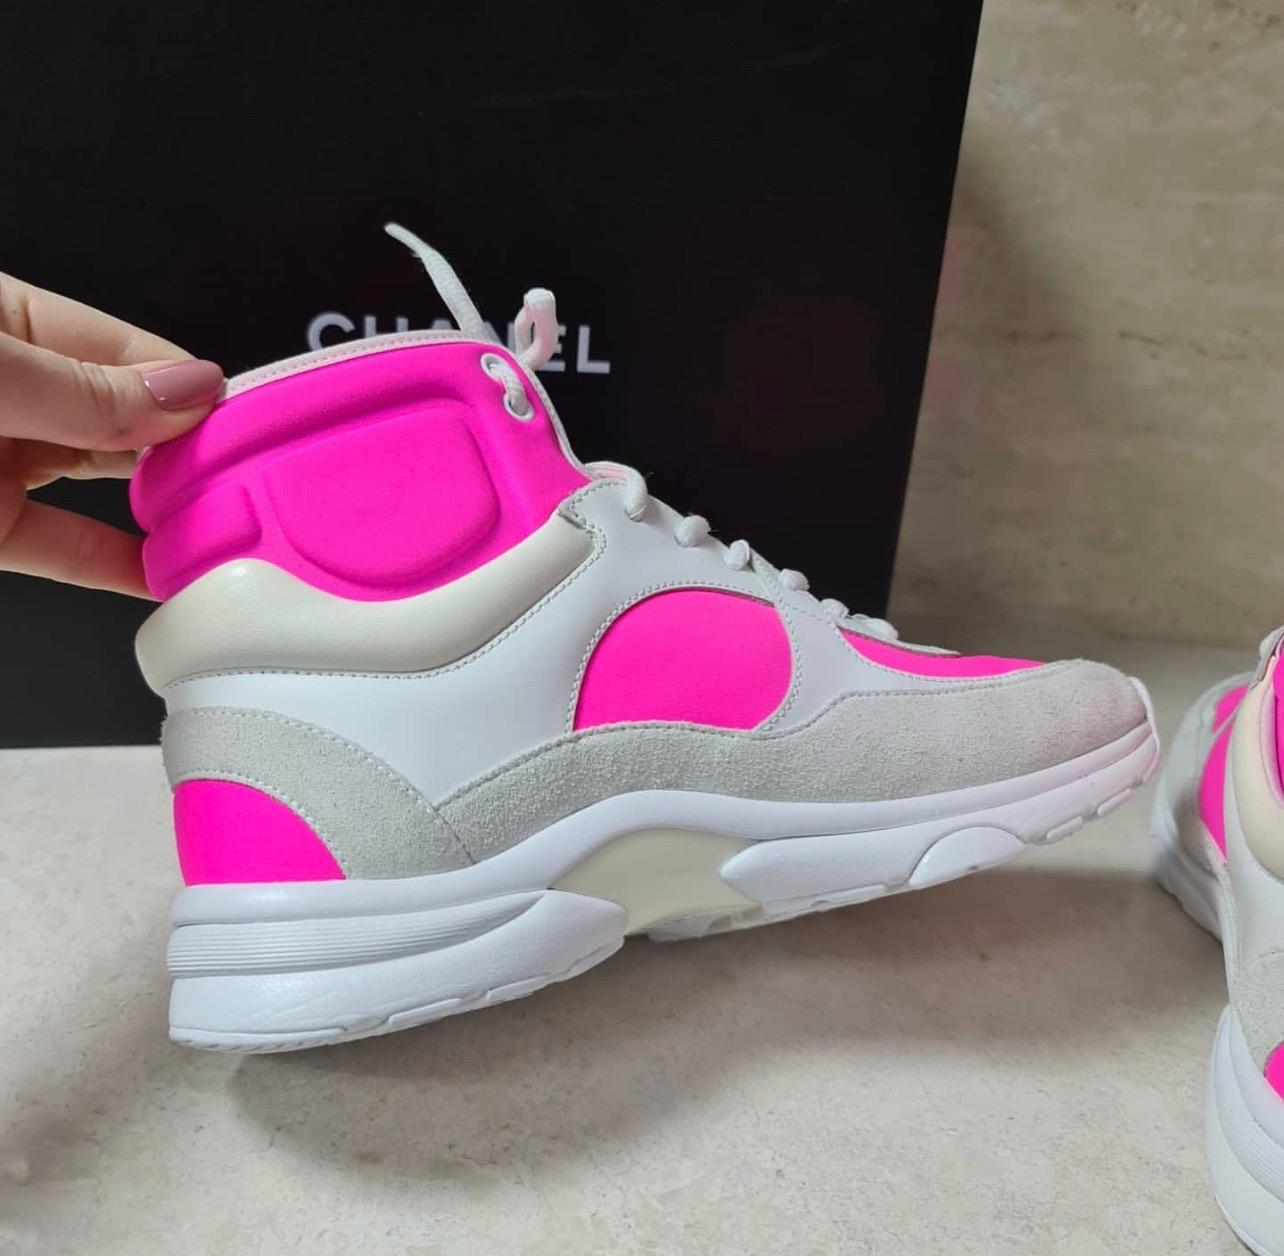 Worn by Lil Wayne. These Chanel High-Top Sneakers feature a white leather and neon pink neoprene textile upper; ivory suede overlays; white leather CC logo patch on the side; tonal lace front; & tonal mid and outsole.

Sz.38

Comes with original box.